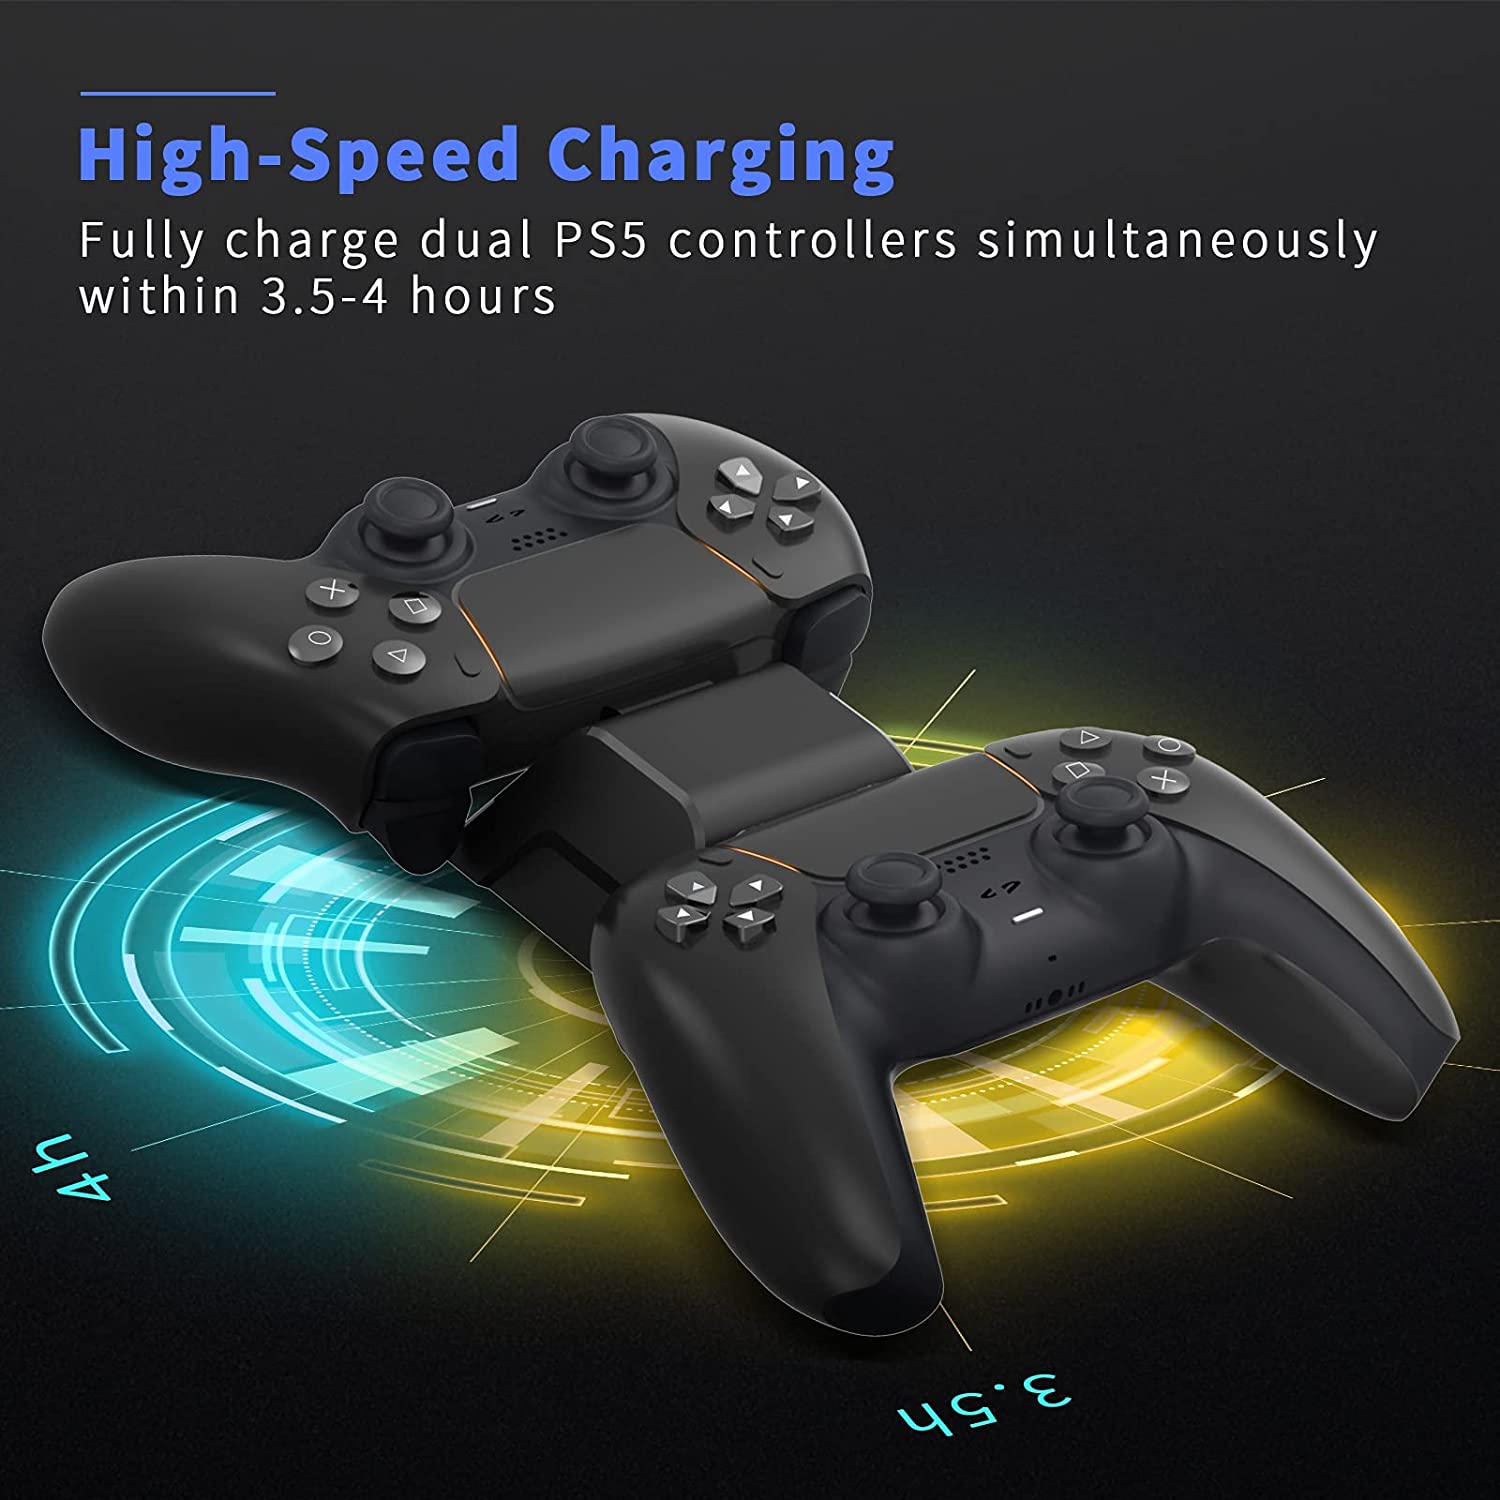 This charger has a fast charging function, fully charging two controllers in 4 hours simultaneously.